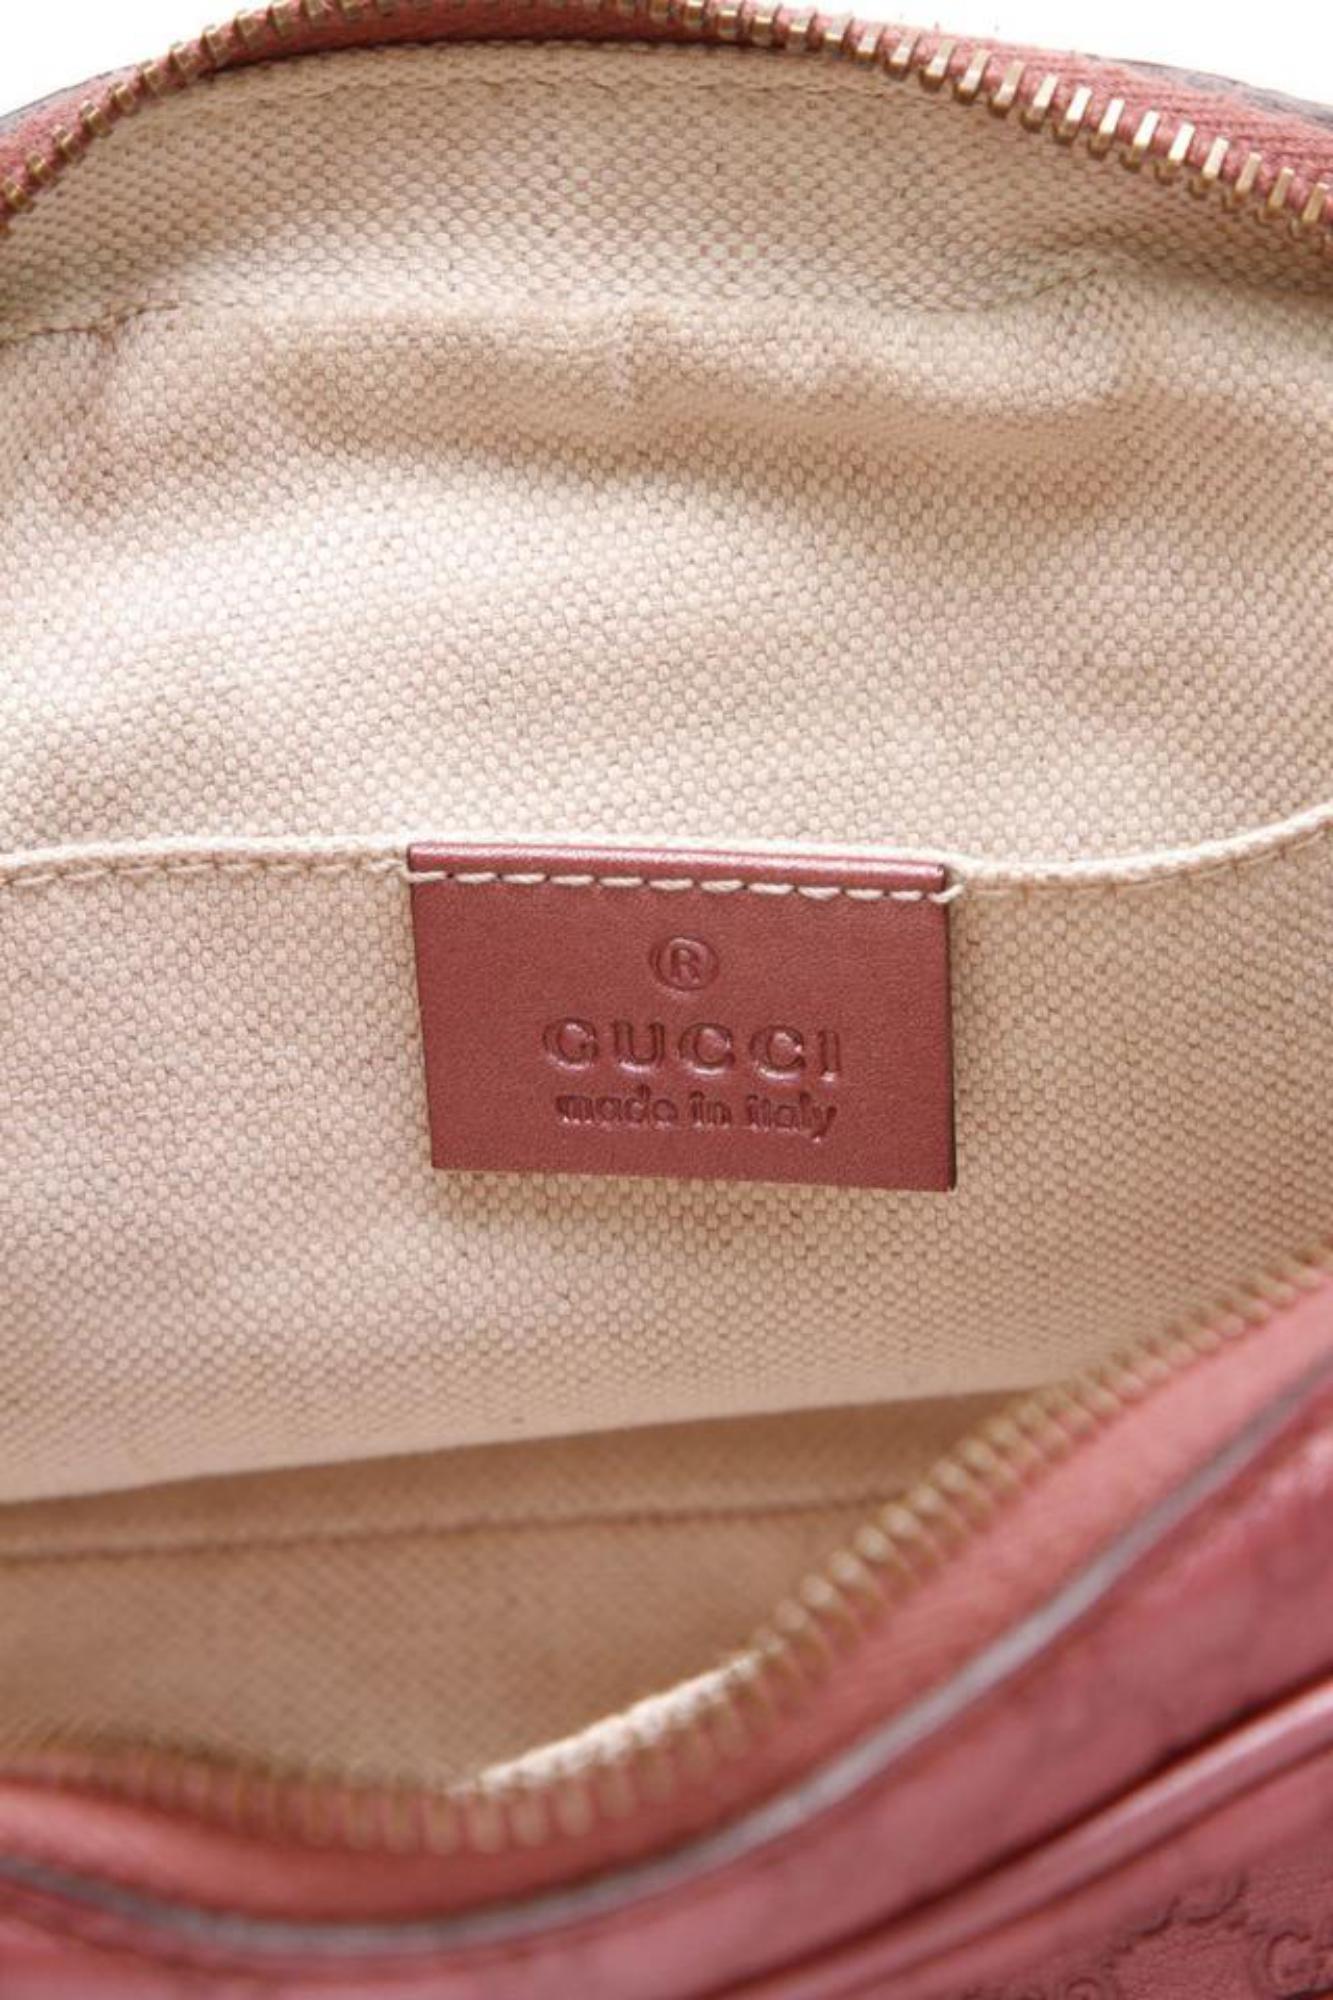 Gucci Soho Guccissima Sunshine Disco 866100 Rose (Pink) Leather Cross Body Bag In Excellent Condition For Sale In Forest Hills, NY